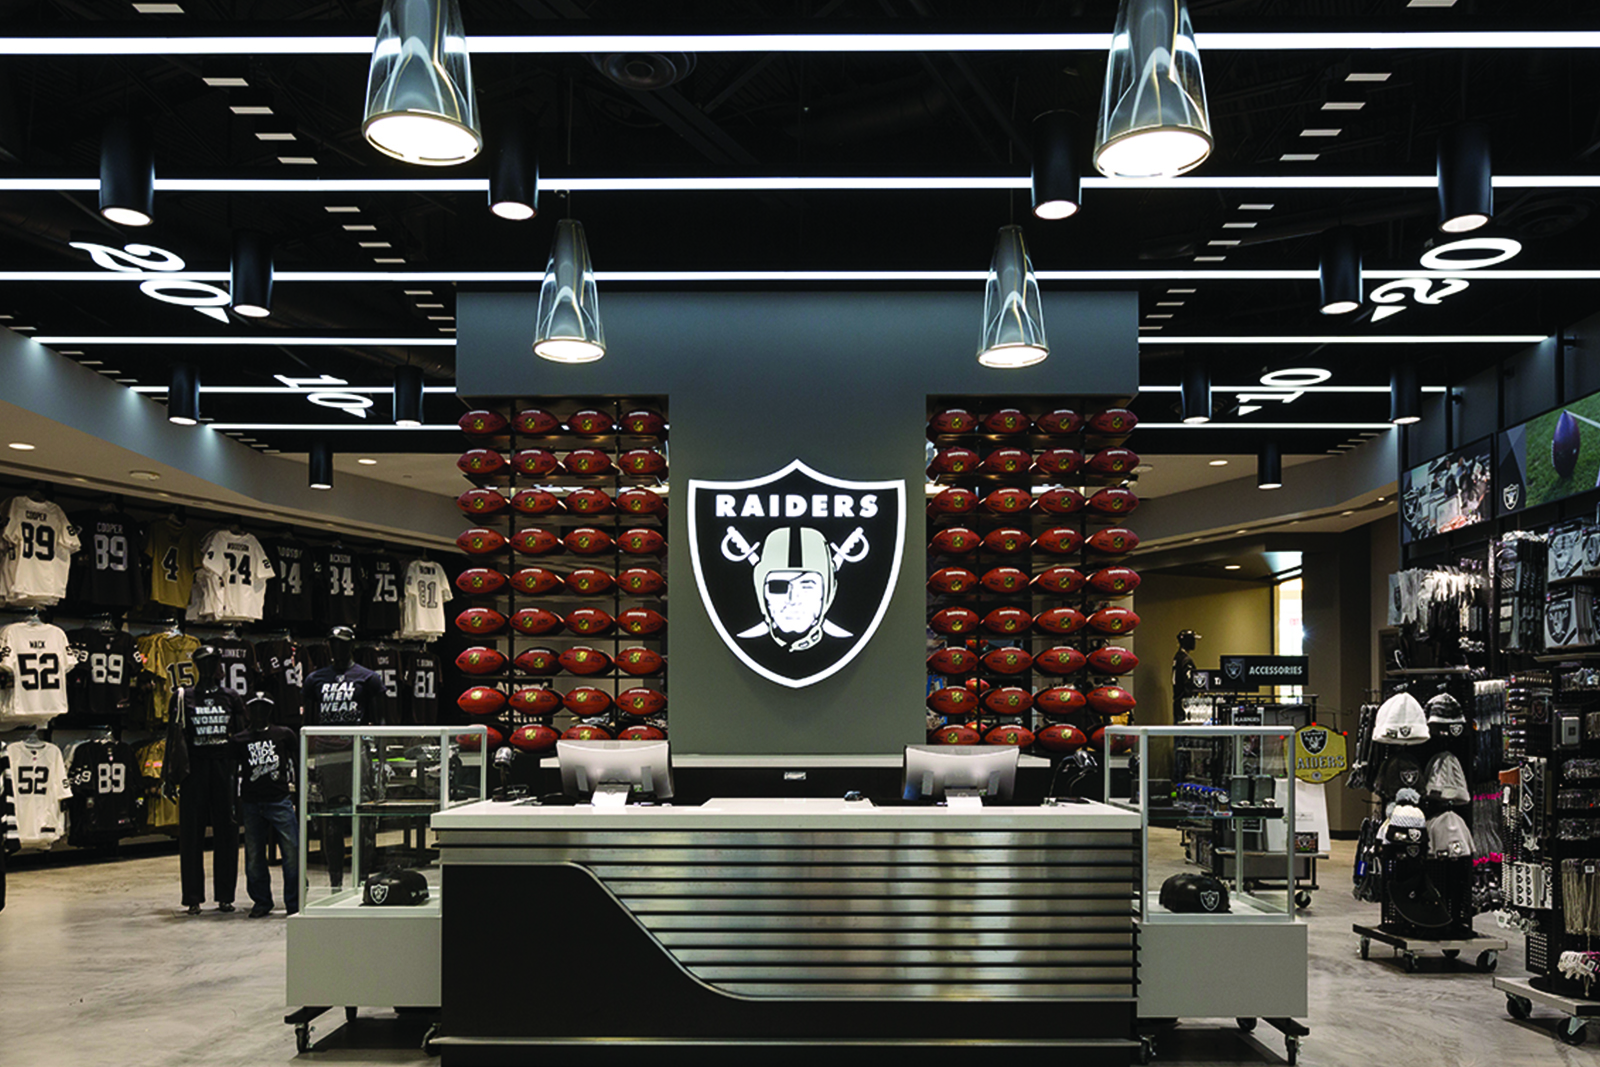 The Raiders Image store, hours, and locations.  Located in the Galleria Mall Henderson, NV and Town Square Las Vegas, NV.